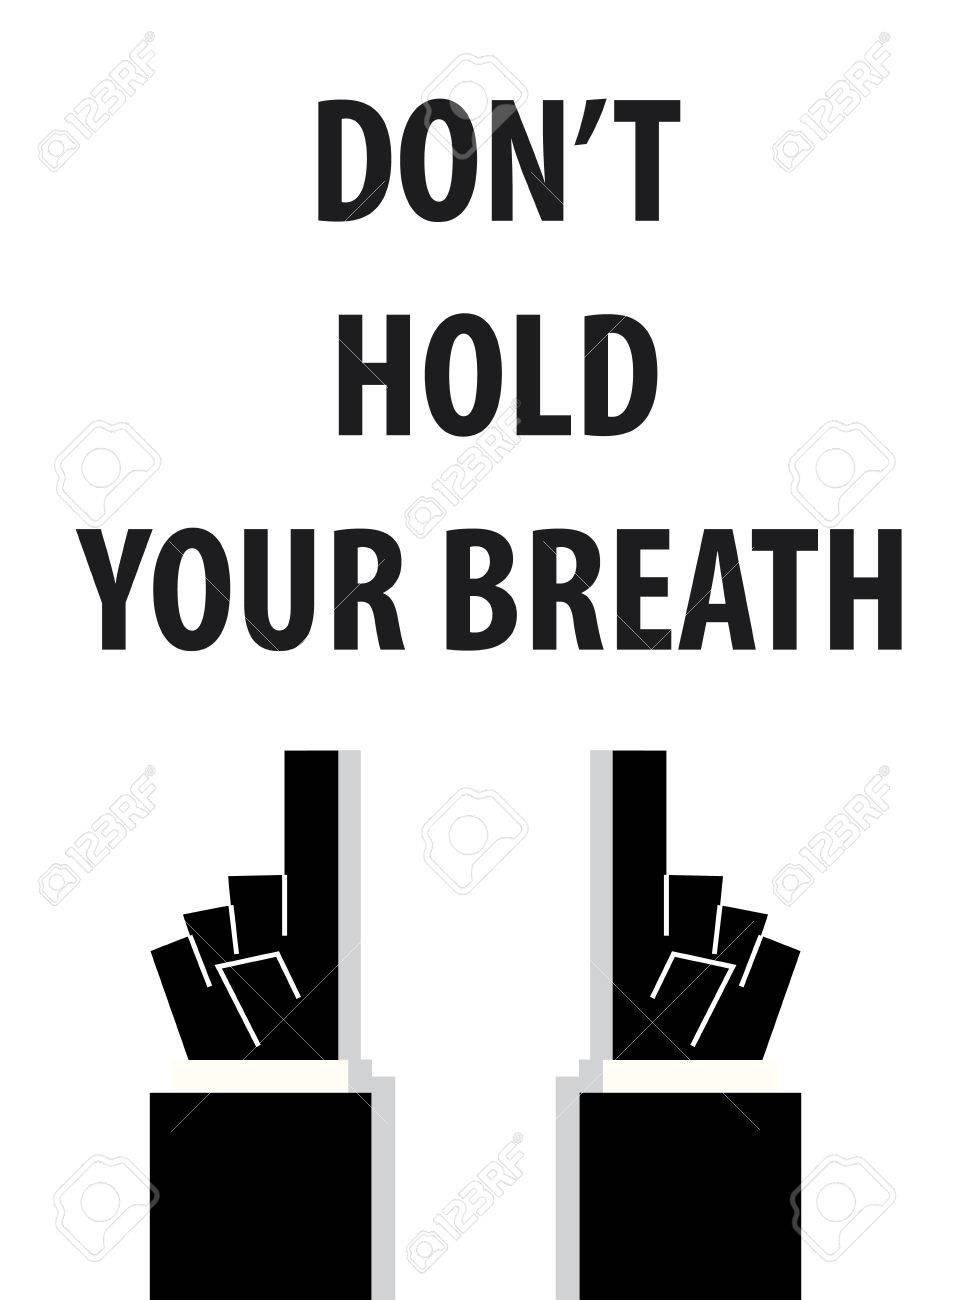 55905207-don-t-hold-your-breath-typography-vector-illustration.jpg